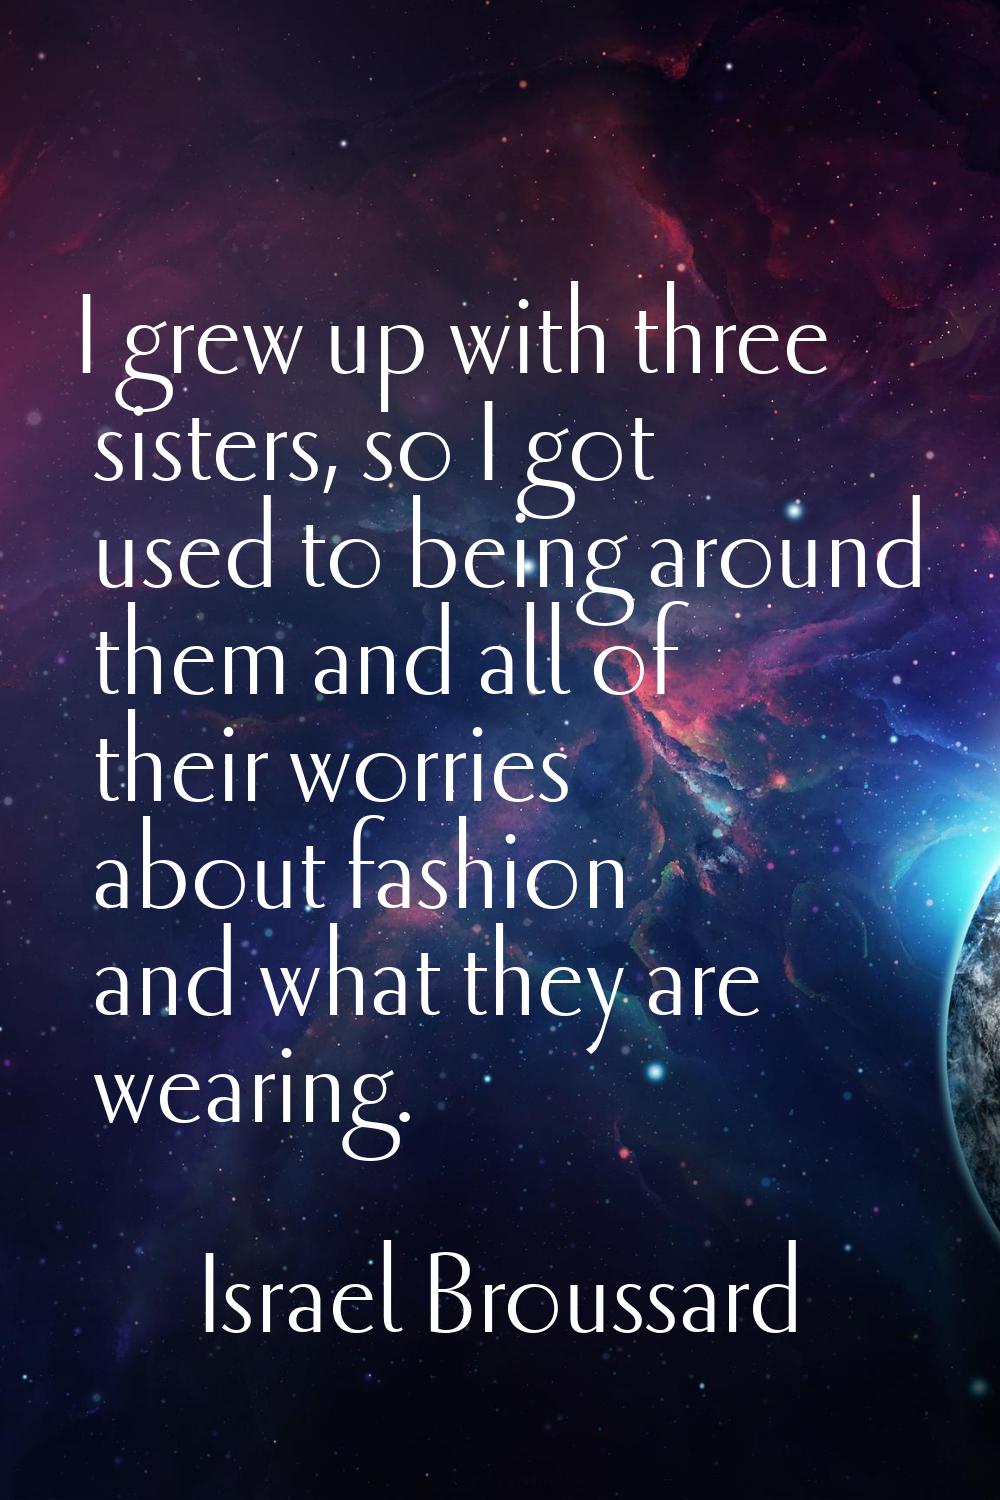 I grew up with three sisters, so I got used to being around them and all of their worries about fas